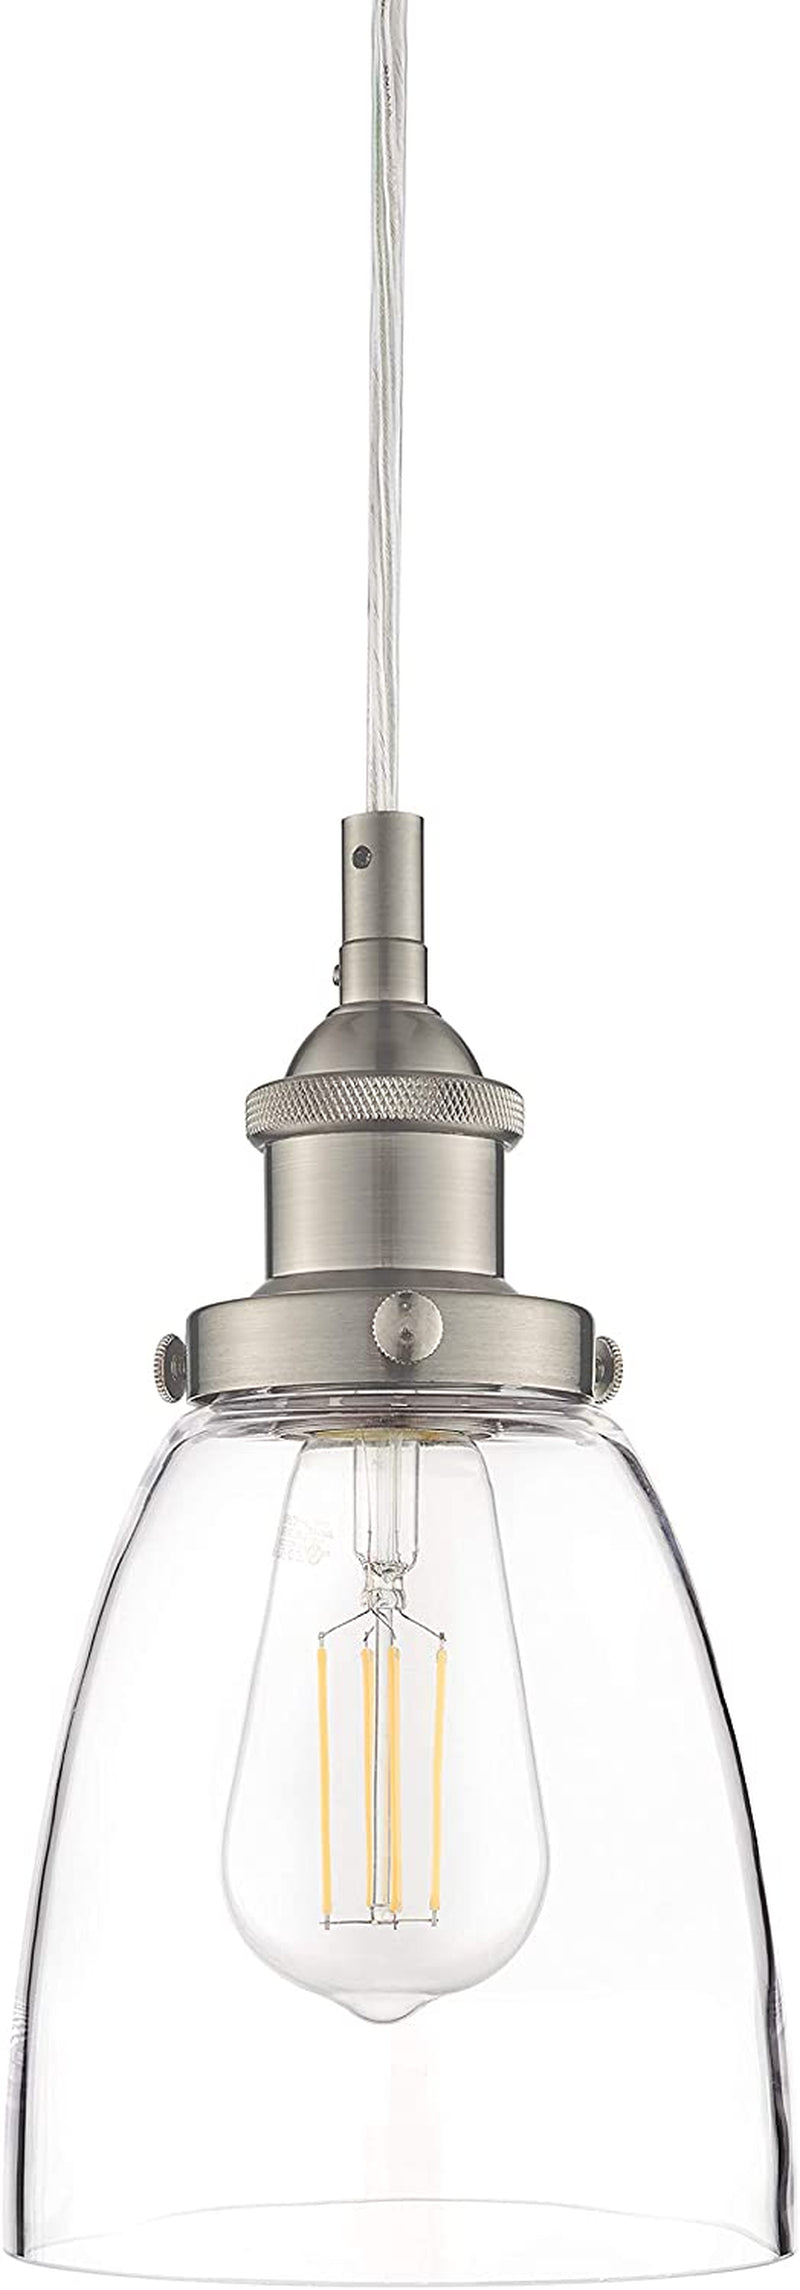 Linea Di Liara Fiorentino Large Glass Pendant Light Fixture Modern Farmhouse Bell Shaped Kitchen Pendant Lighting over Island Brushed Nickel Pendant Light Shade over Sink Lighting Fixtures, UL Listed